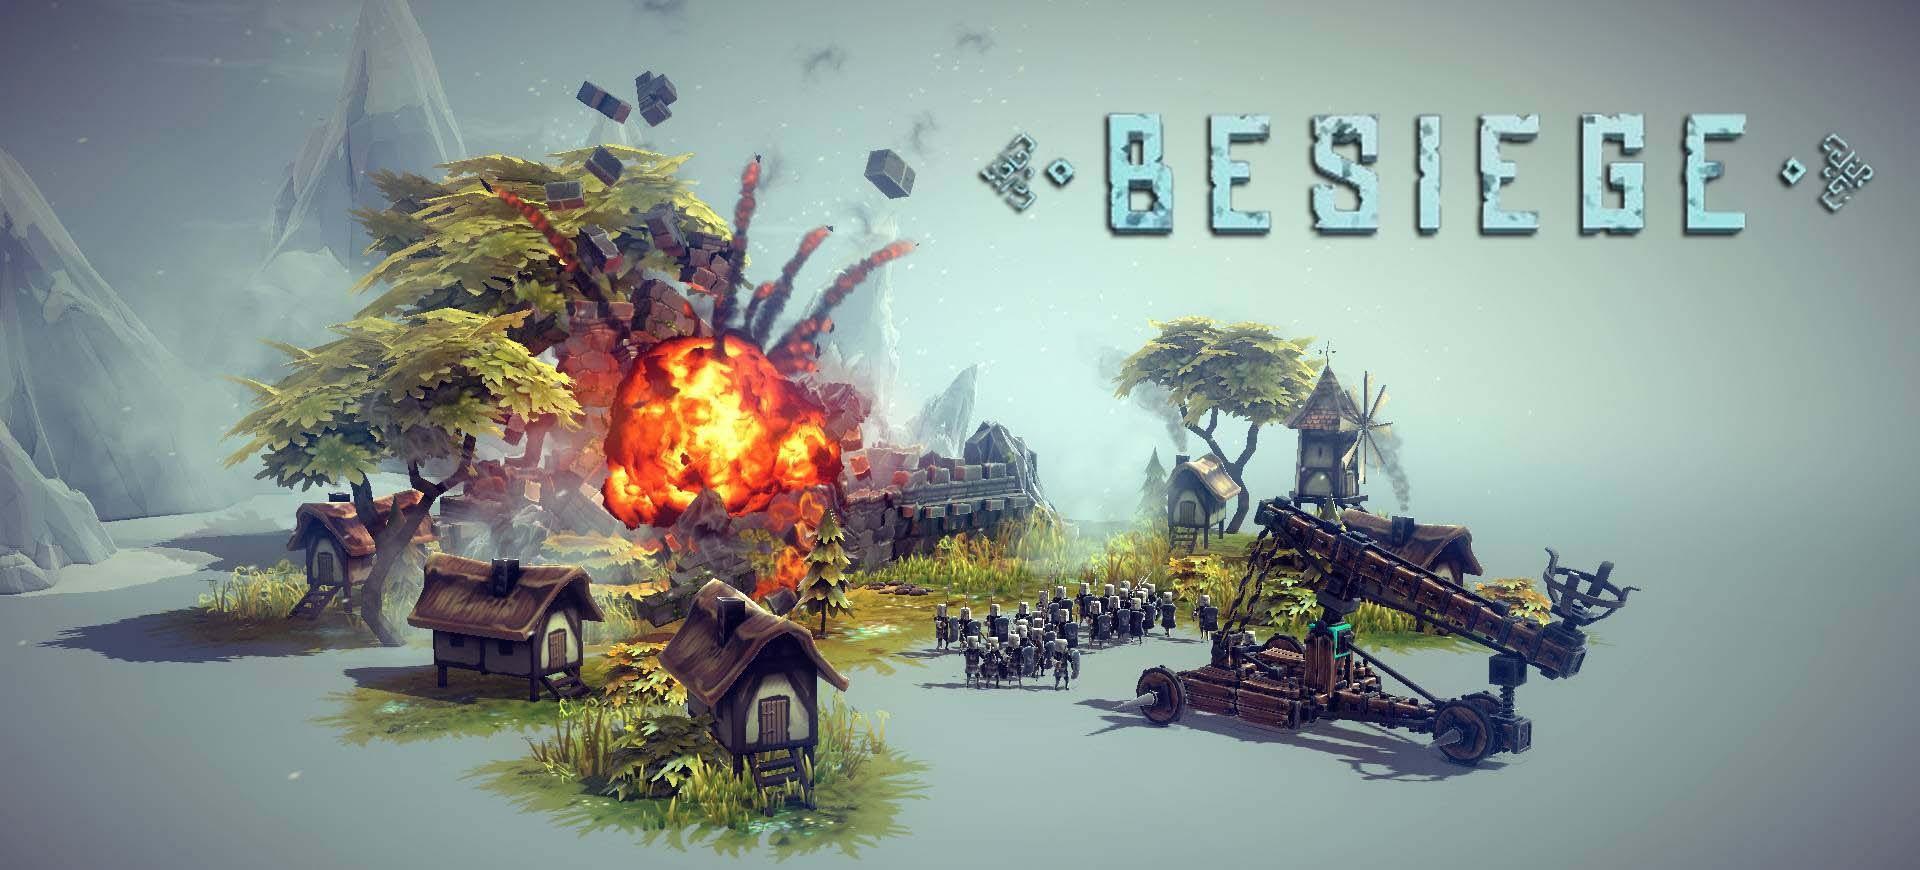 besiege-cong-thanh-chien